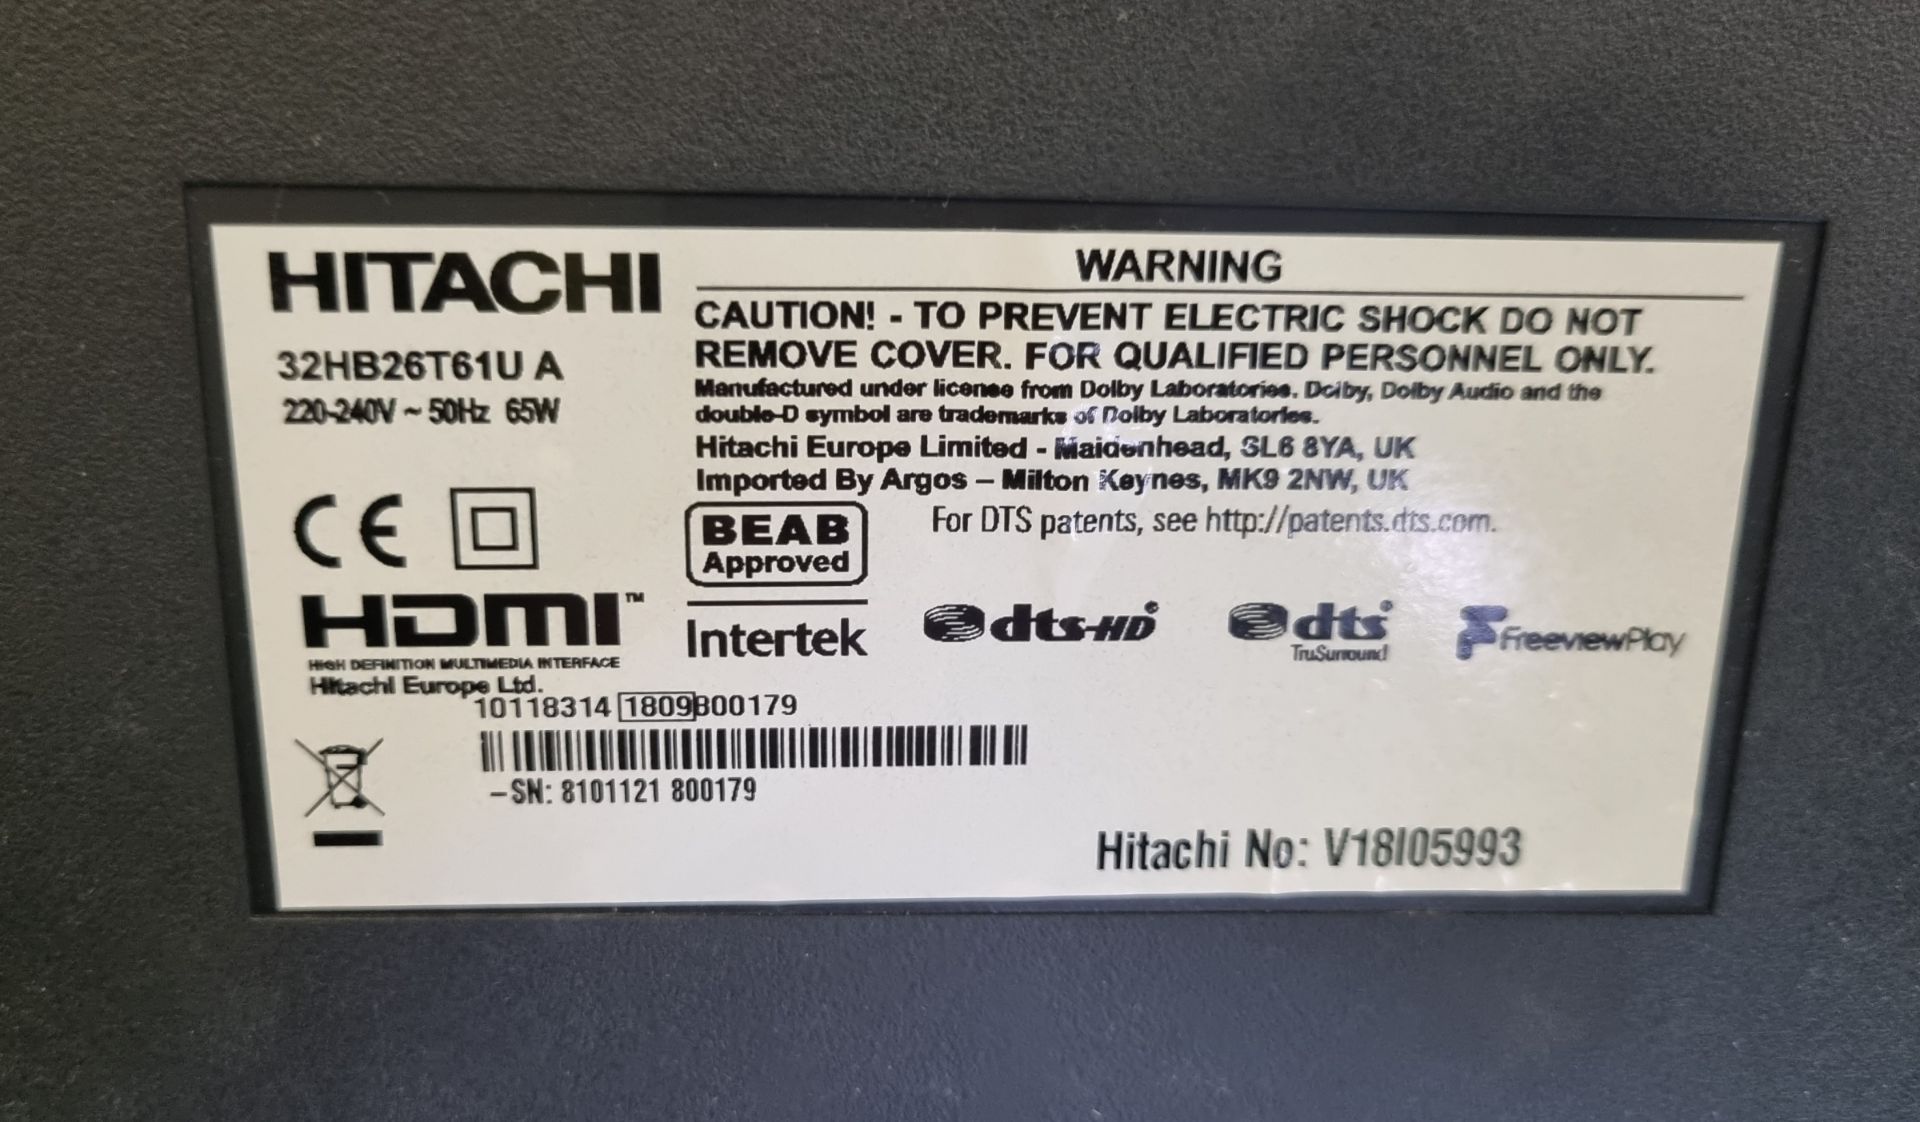 Hitachi 32HB26T61U colour tv monitor - W730 x D 90 x H 430 mm - Image 3 of 3